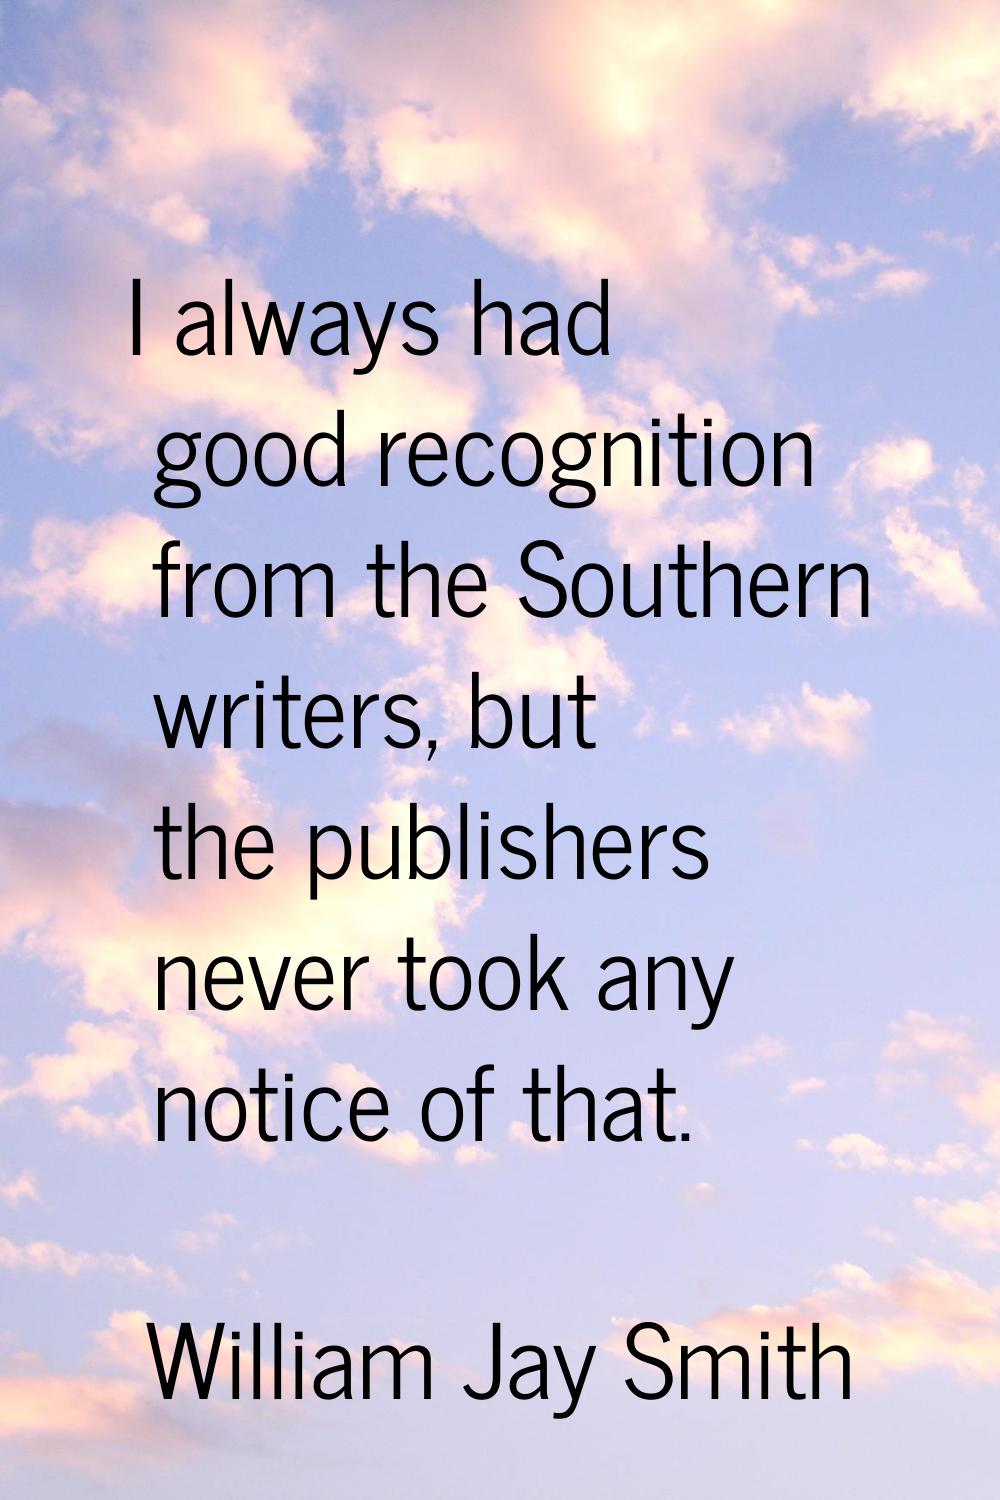 I always had good recognition from the Southern writers, but the publishers never took any notice o